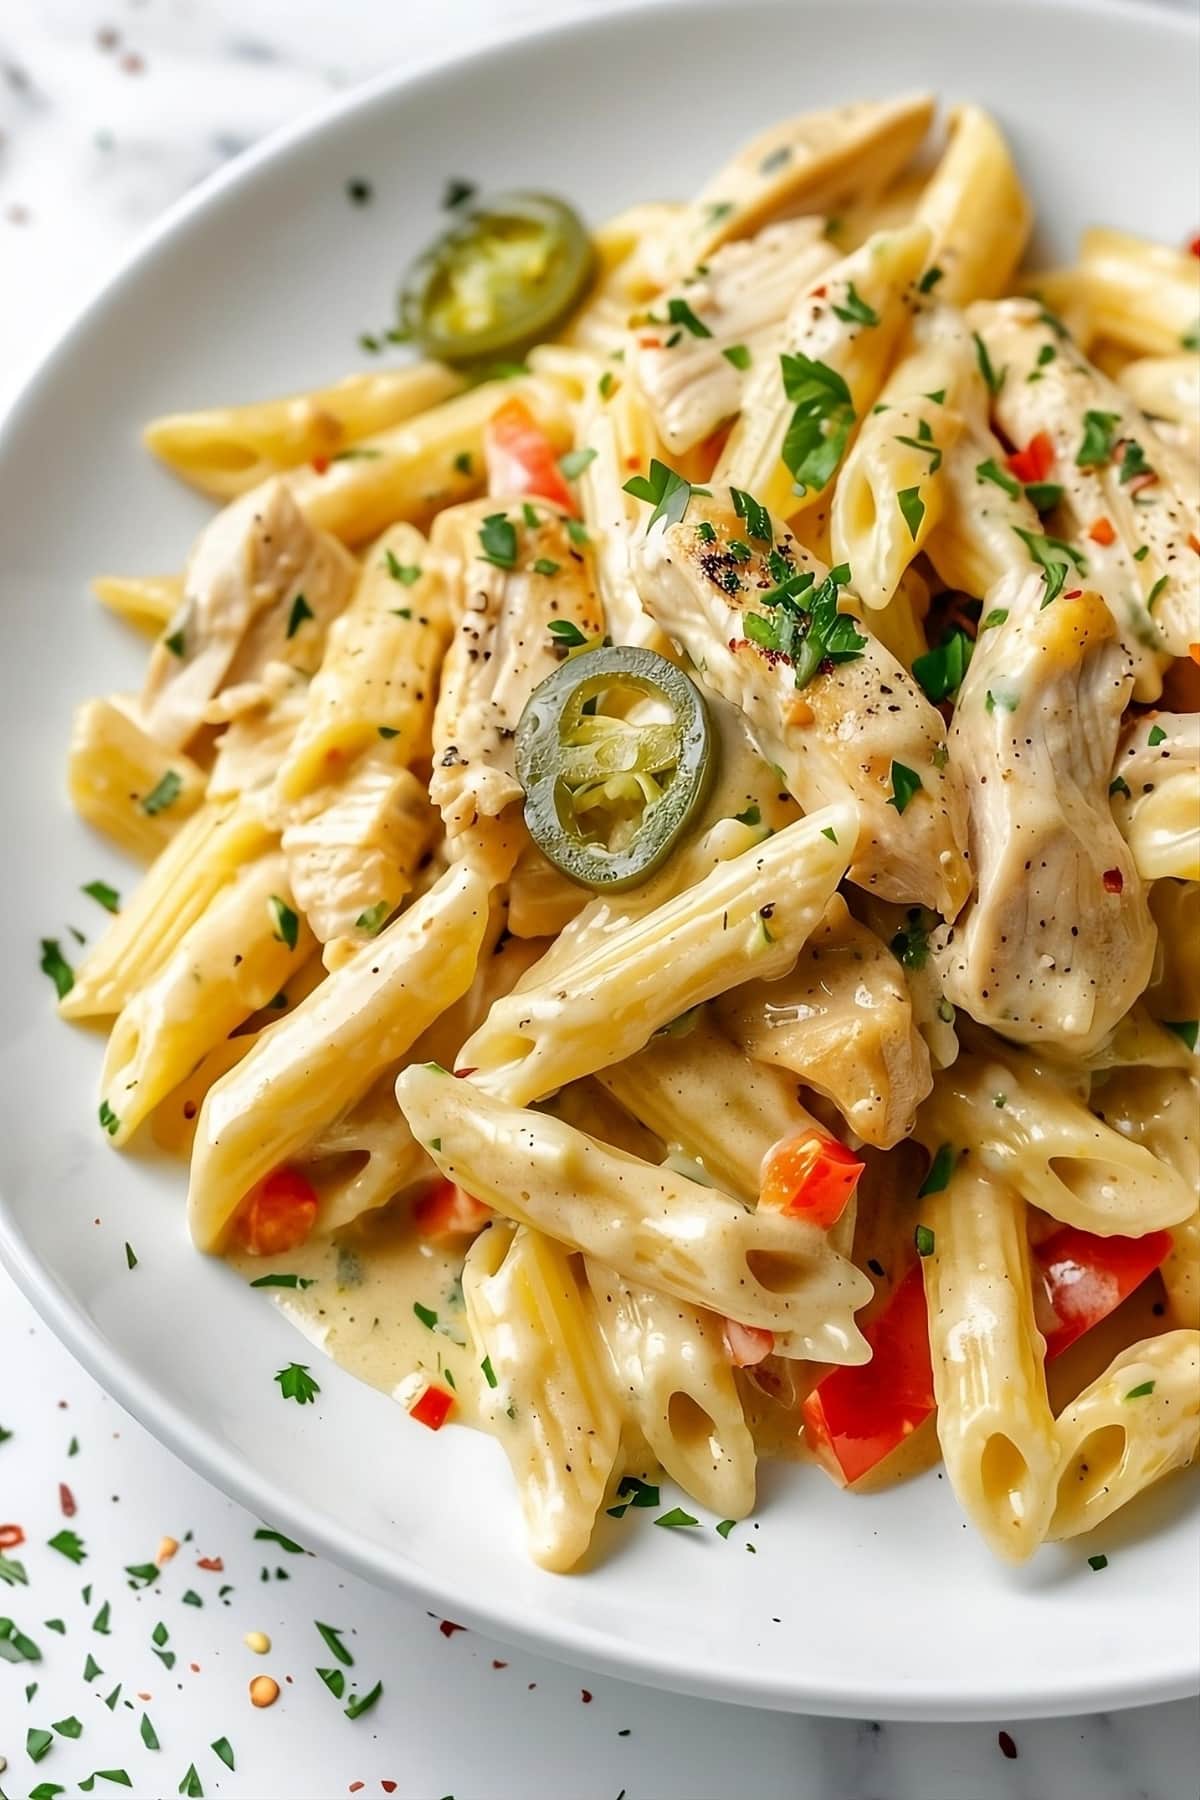 Chicken, bell peppers, jalapeños, and Parmesan sauce in rattlesnake pasta.